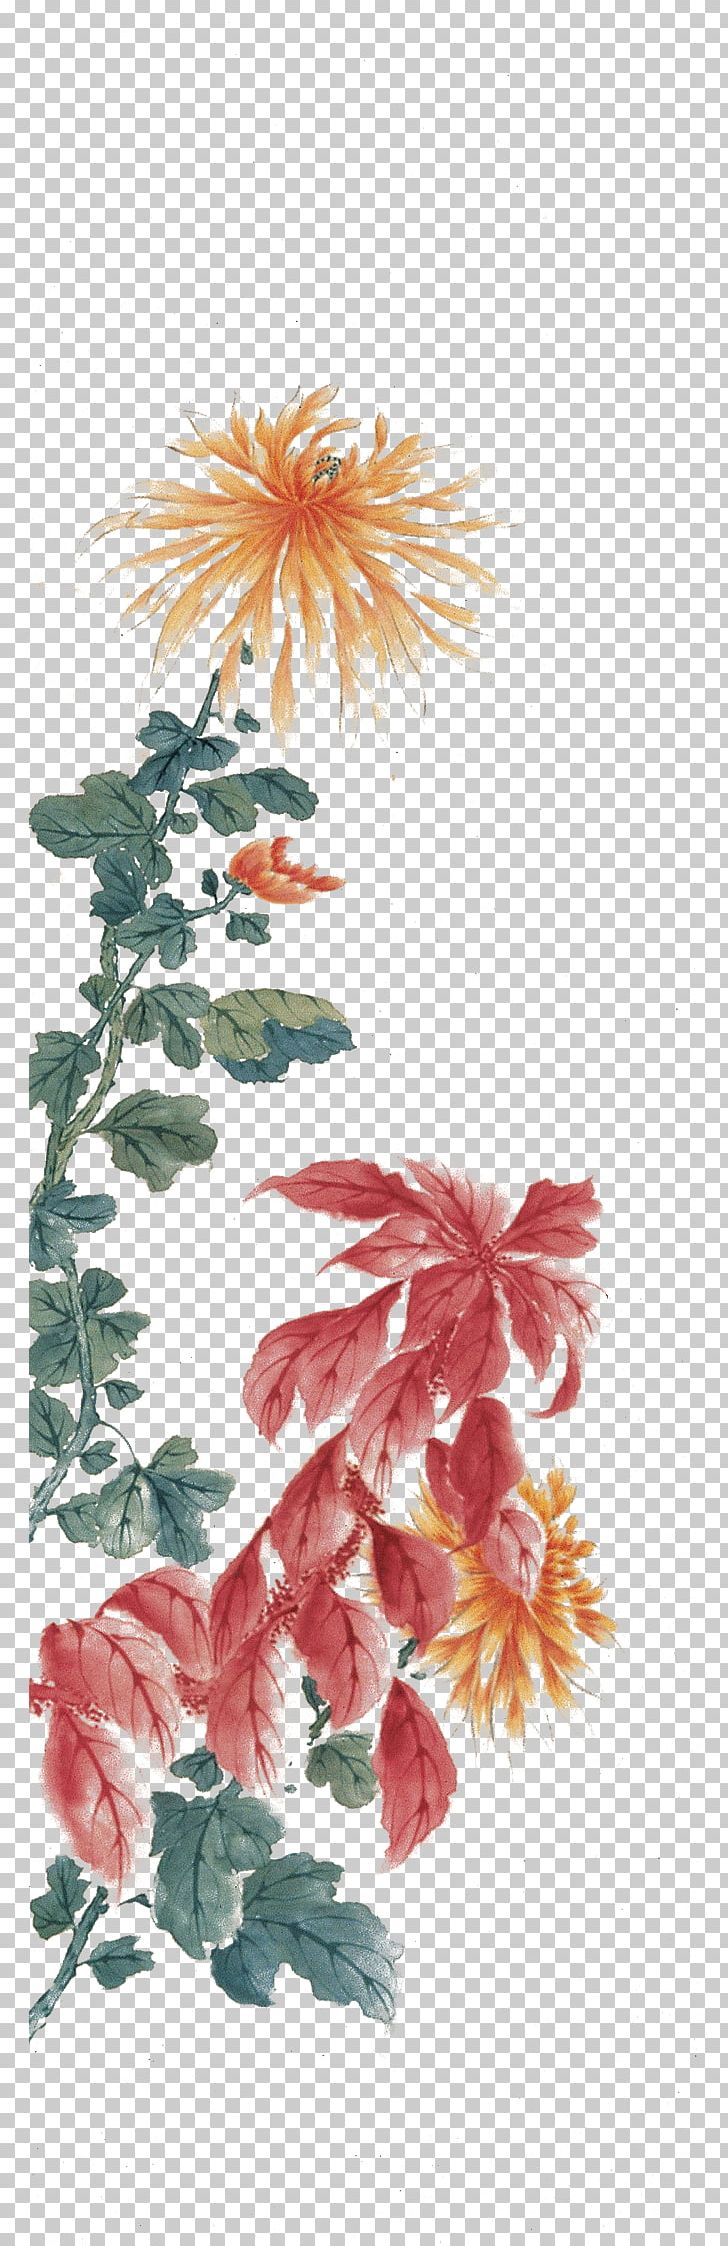 Watercolor Painting Floral Design Ink Wash Painting PNG, Clipart, Branch, Chrysanthemum, Dahlia, Flower, Flower Arranging Free PNG Download